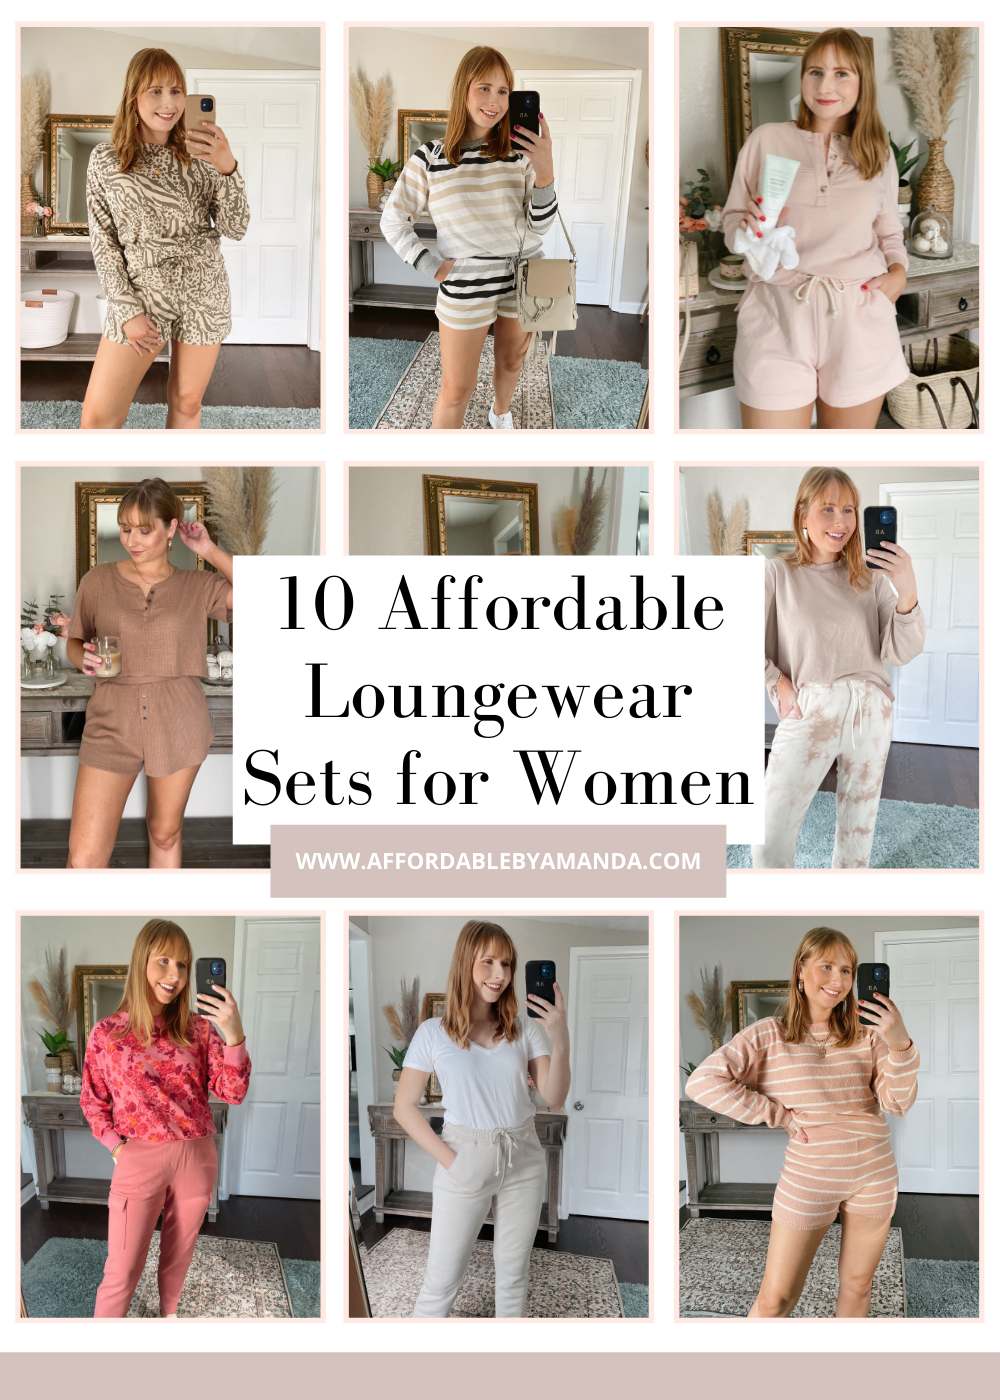 10 Affordable Loungewear Sets for Women